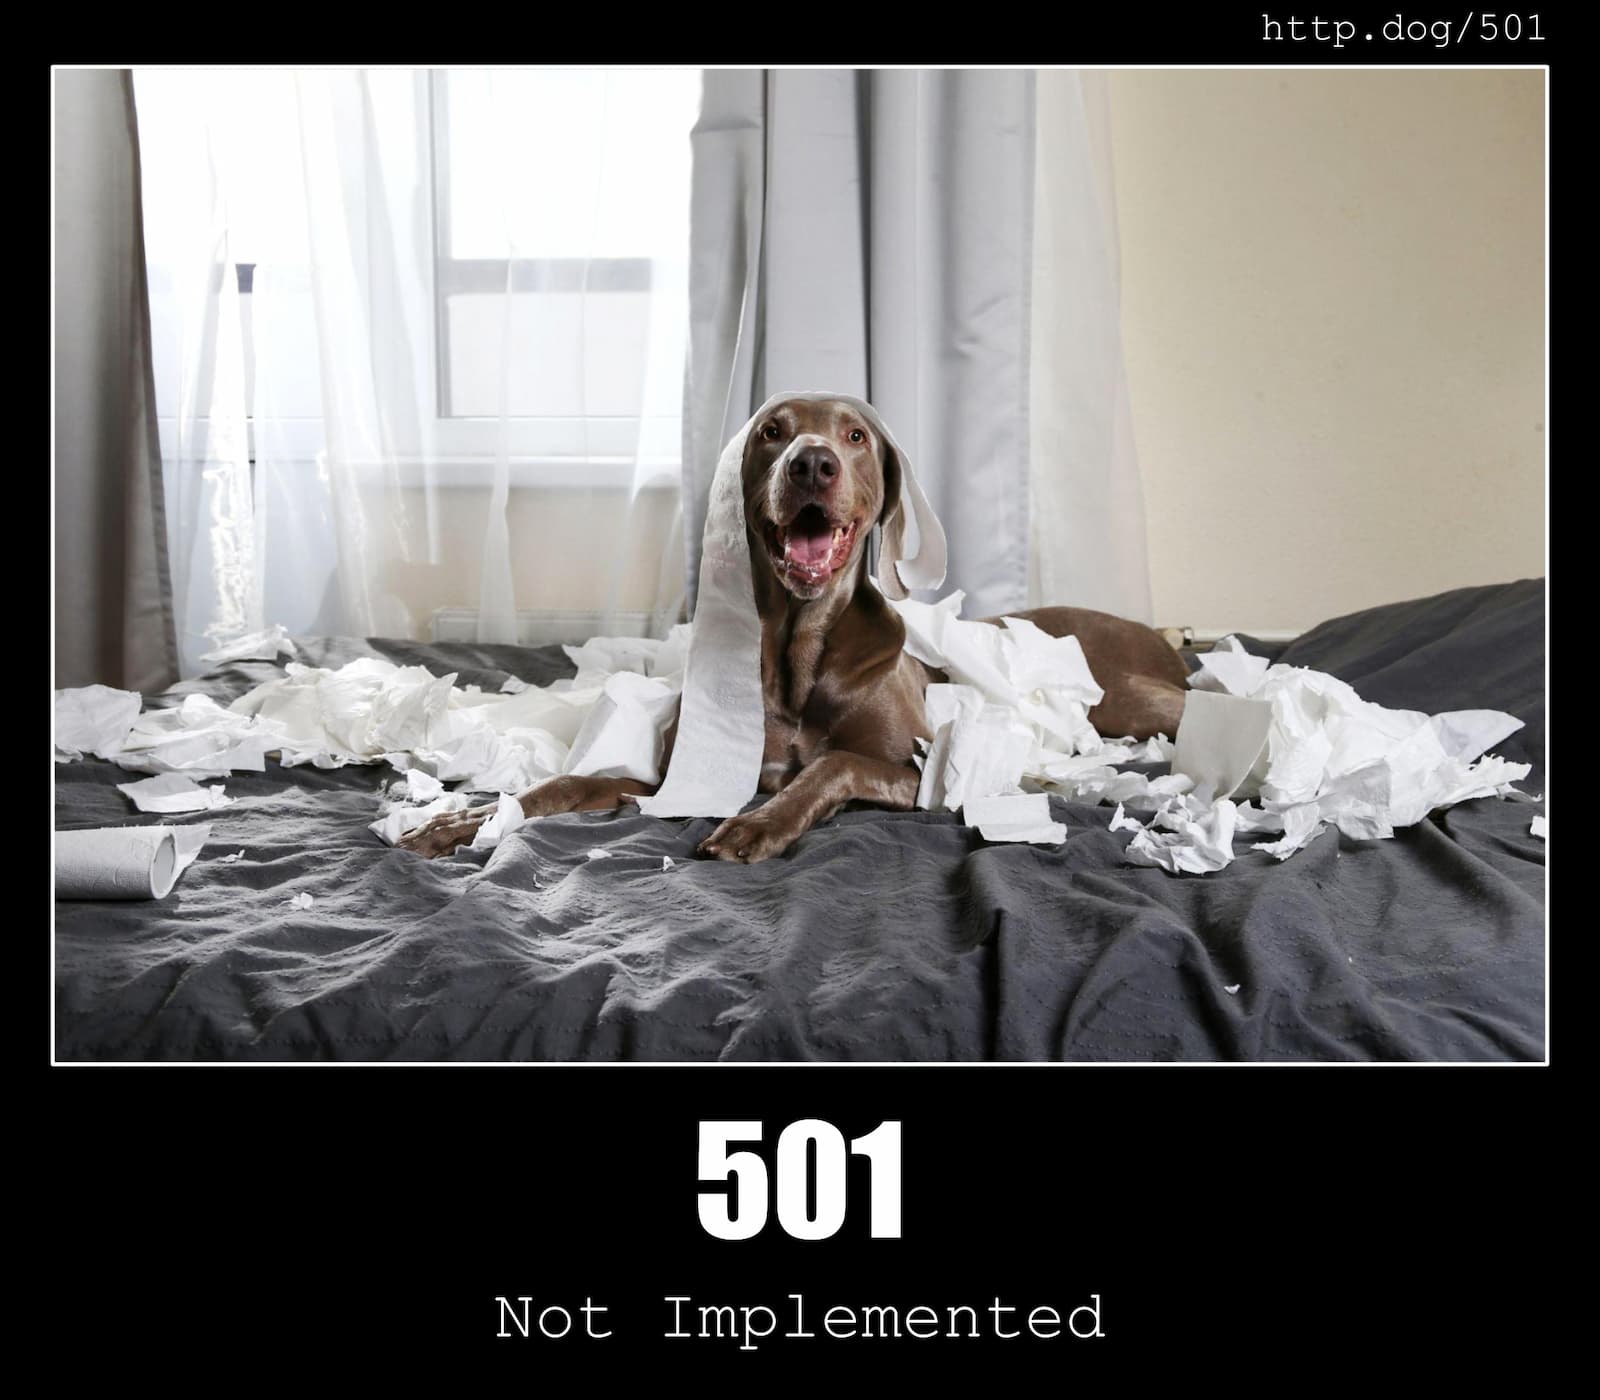 HTTP Status Code 501 Not Implemented & Dogs